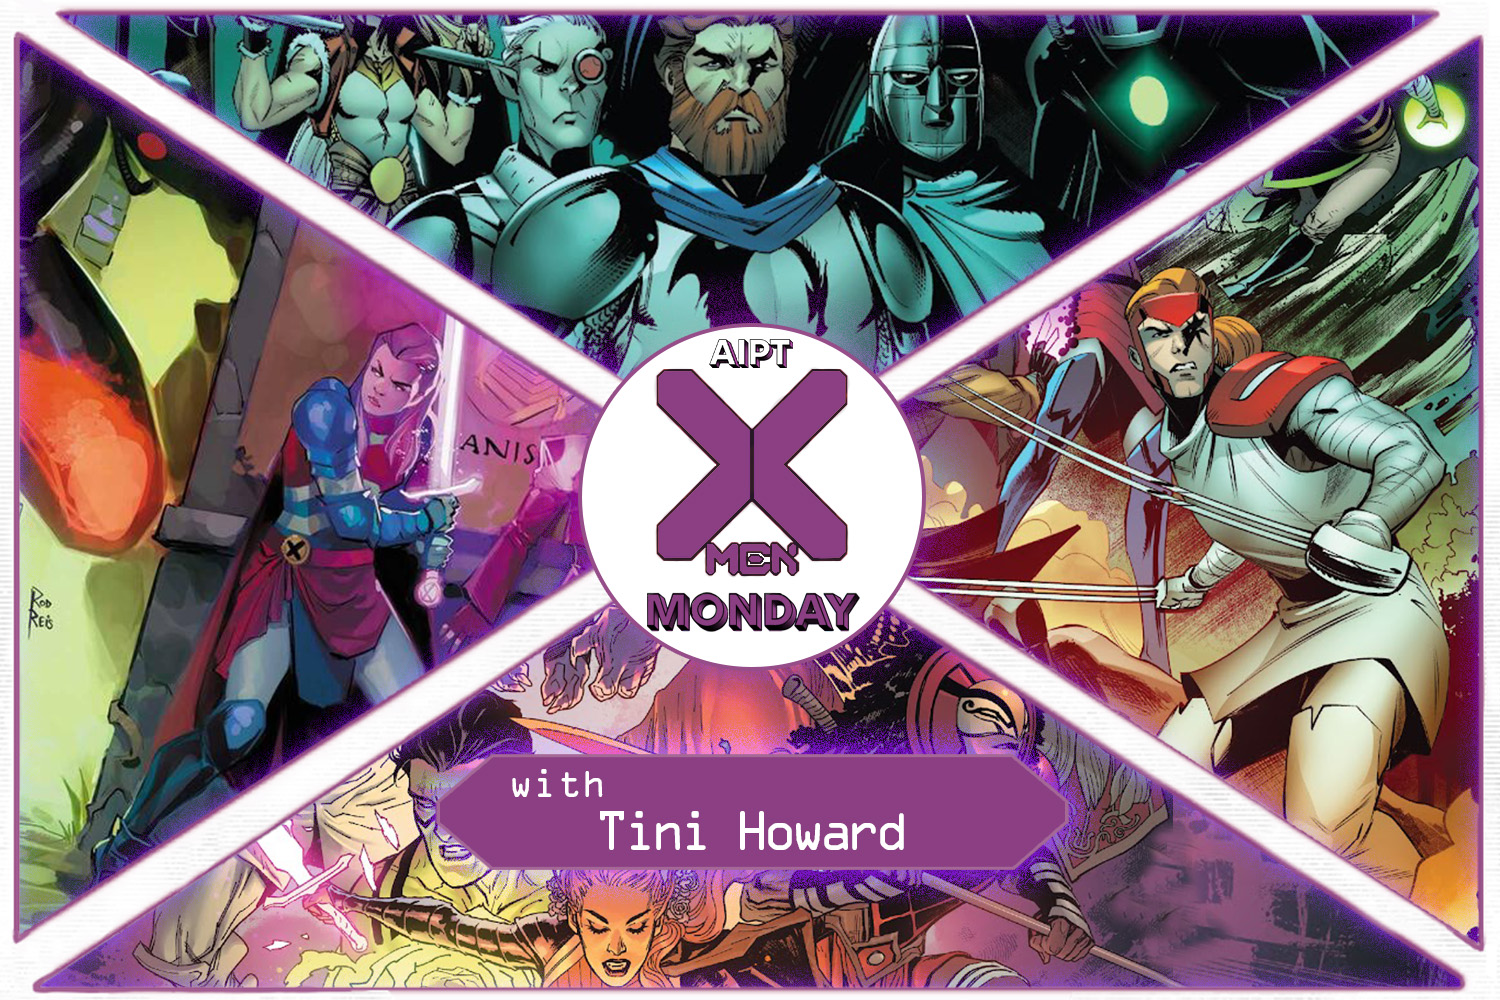 X-Men Monday #155 - Tini Howard Discusses 'Knights of X #1'